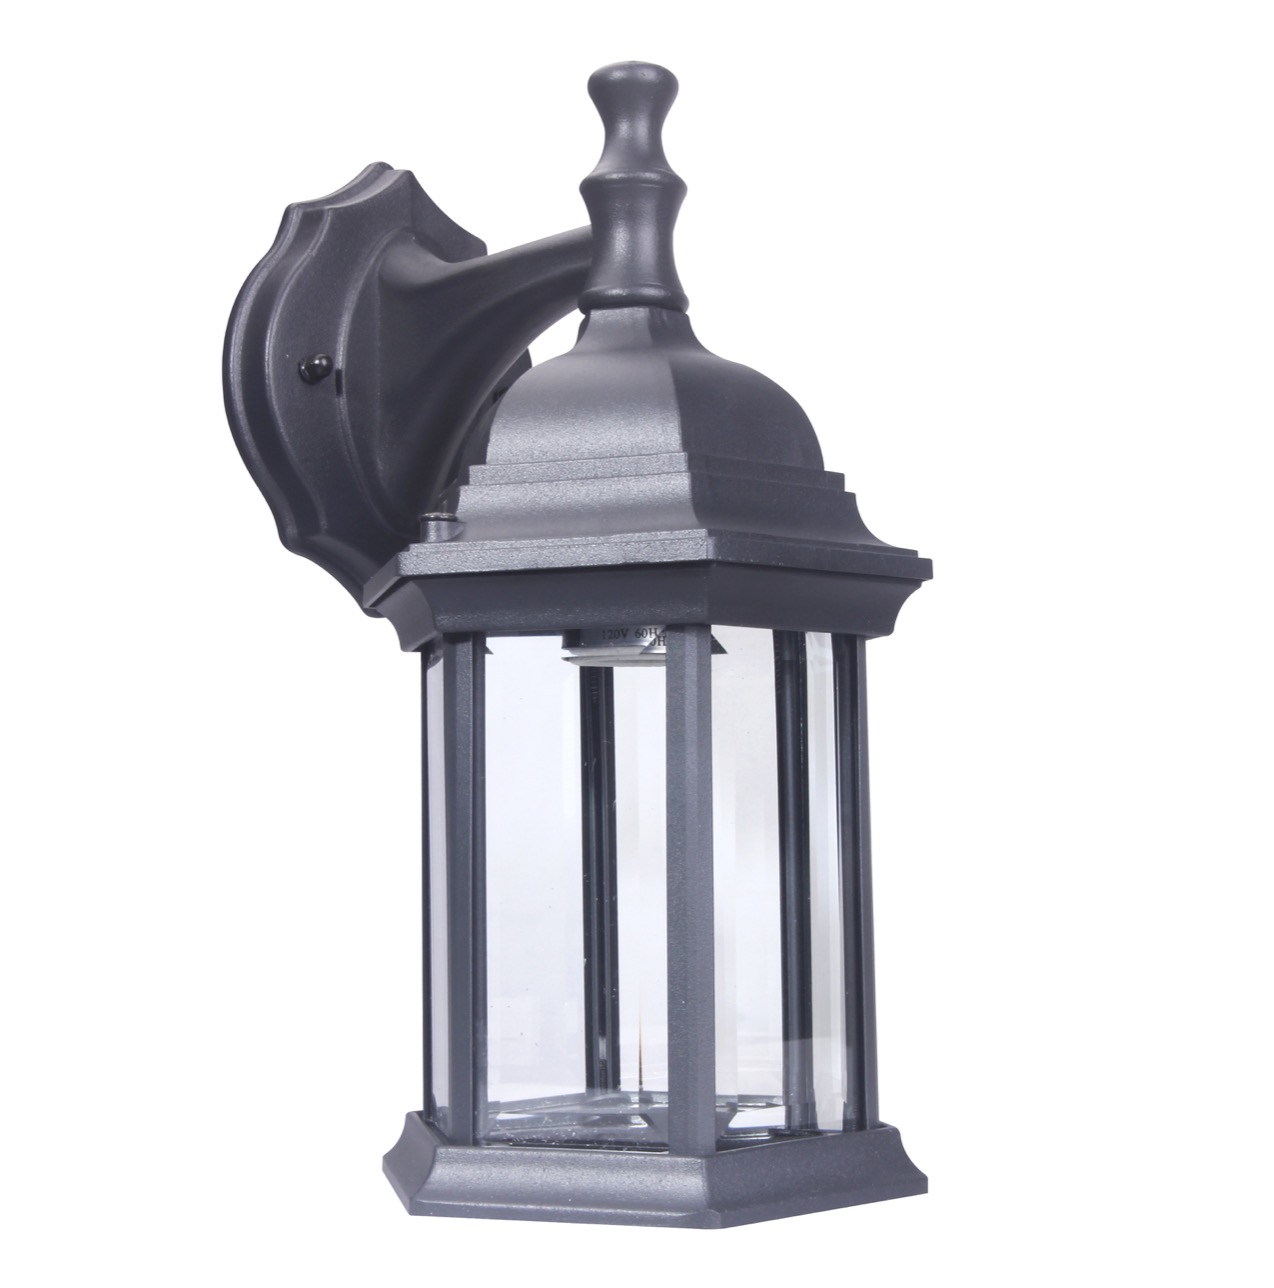 LIT-PaTH Outdoor Wall Lantern, Wall Sconce Light as Porch Lighting Fixture with One E26 Base Max 100W, Aluminum Housing Plus Glass, Matte Black Finish, Water-Proof Outdoor Rated